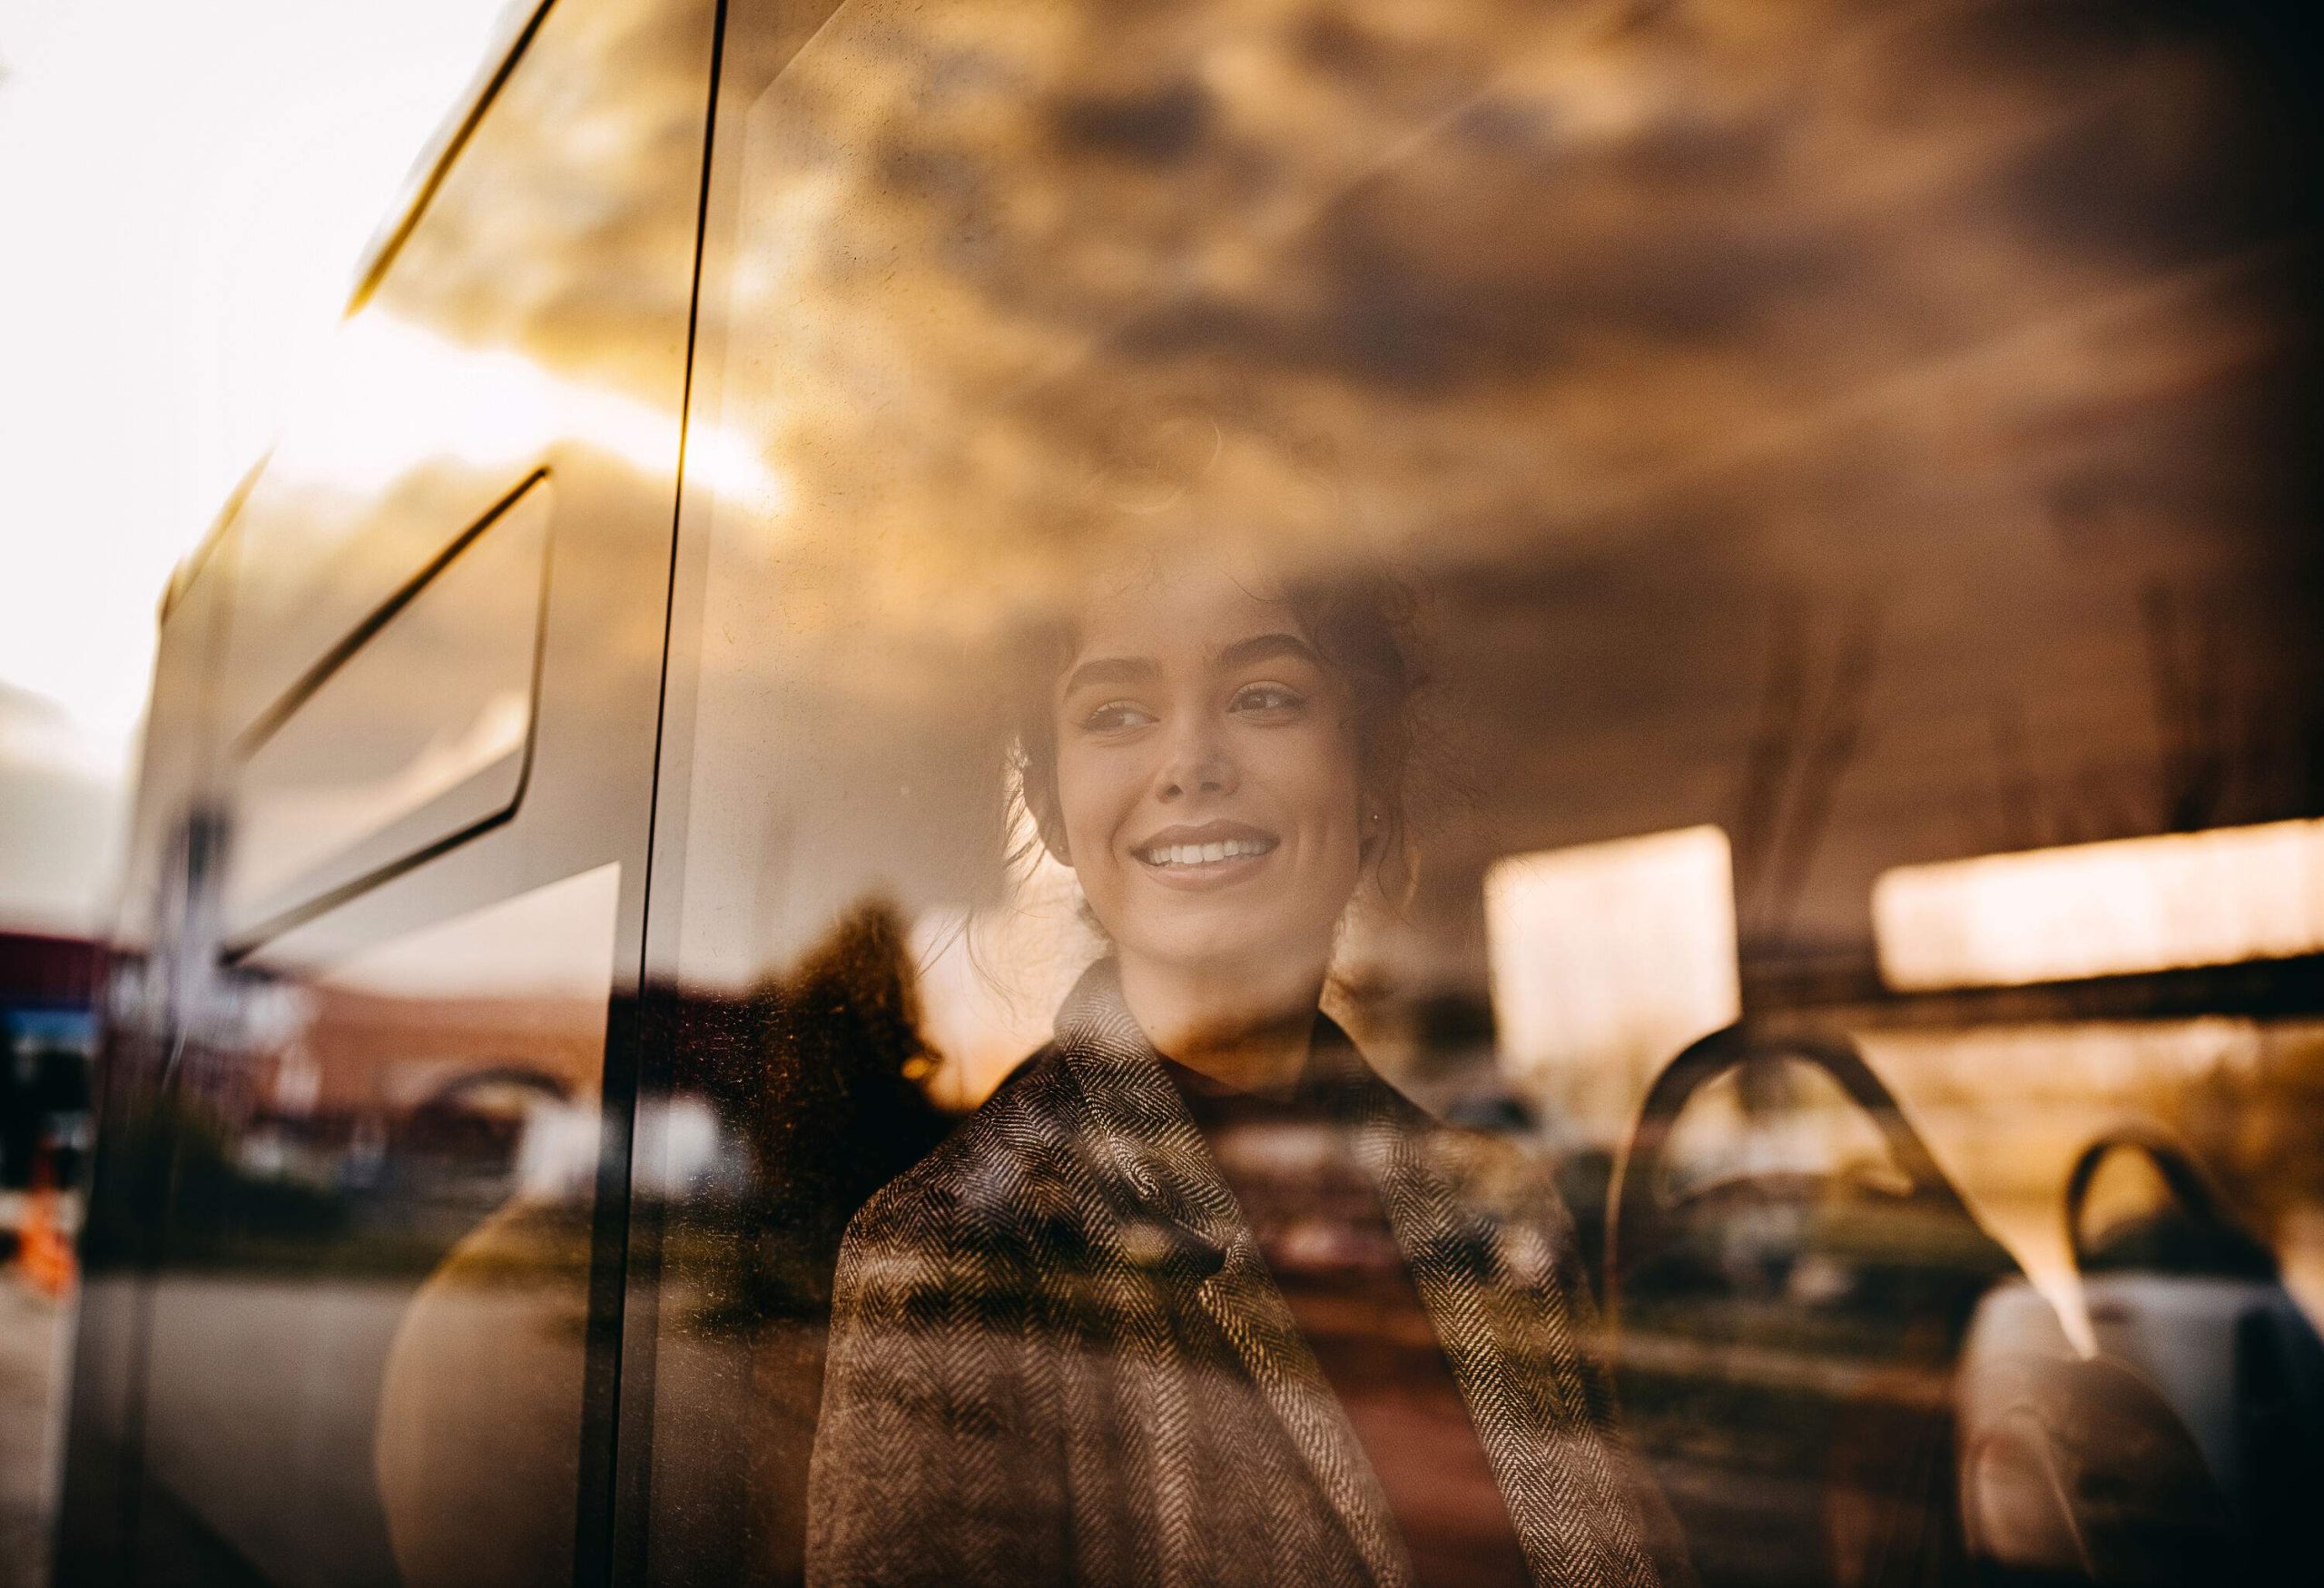 A woman in a coat smiles as she looks out a bus window.